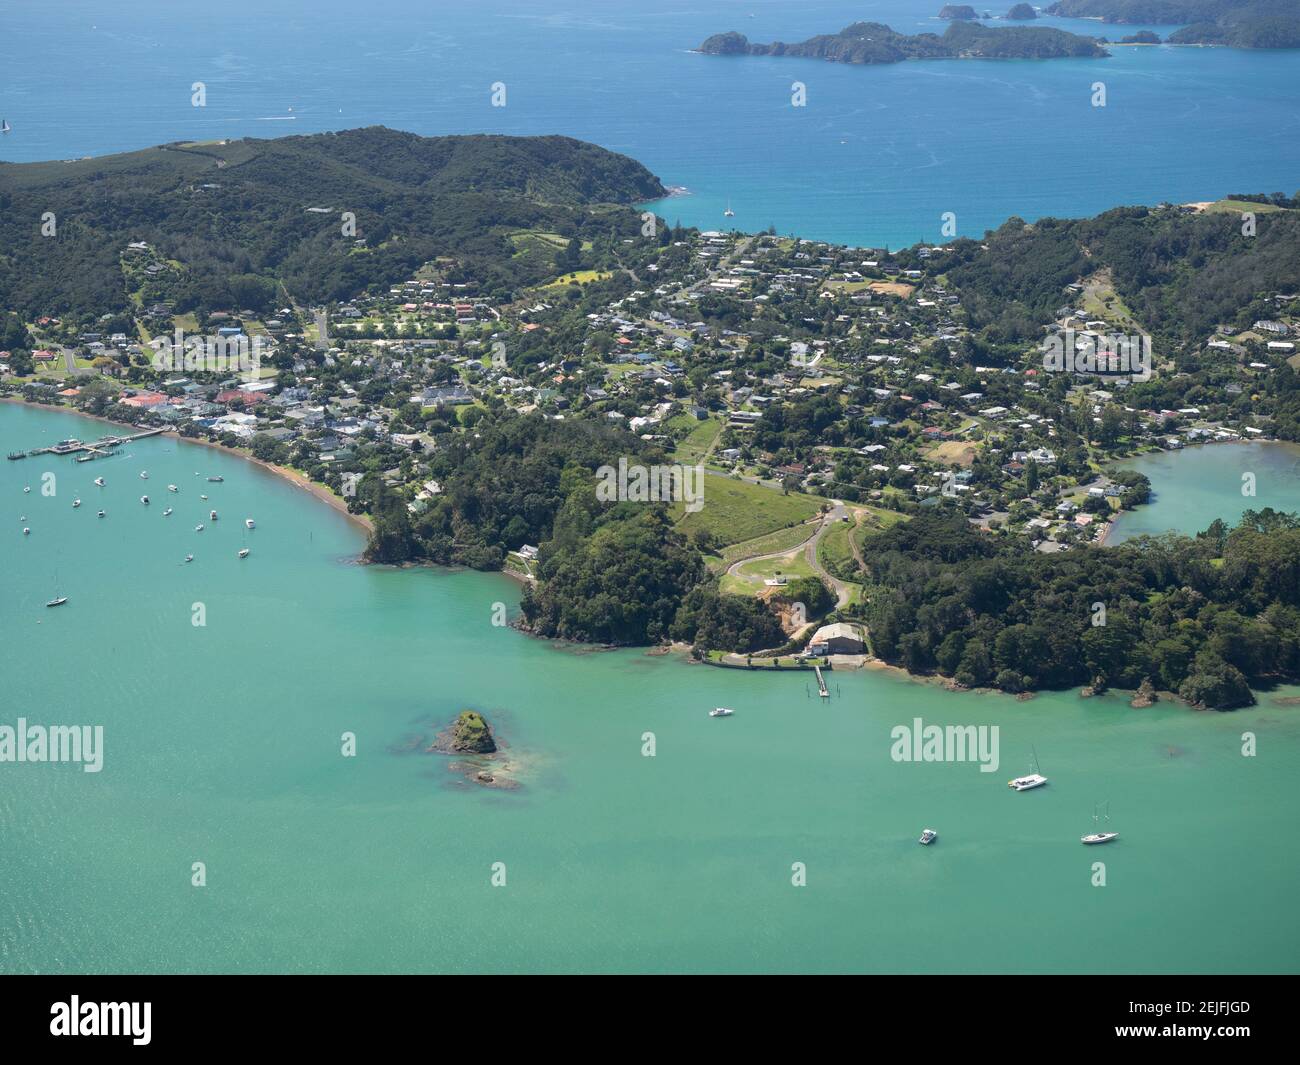 Aerial view of town on island, Russell, Bay of Islands, Northland, North Island, New Zealand Stock Photo